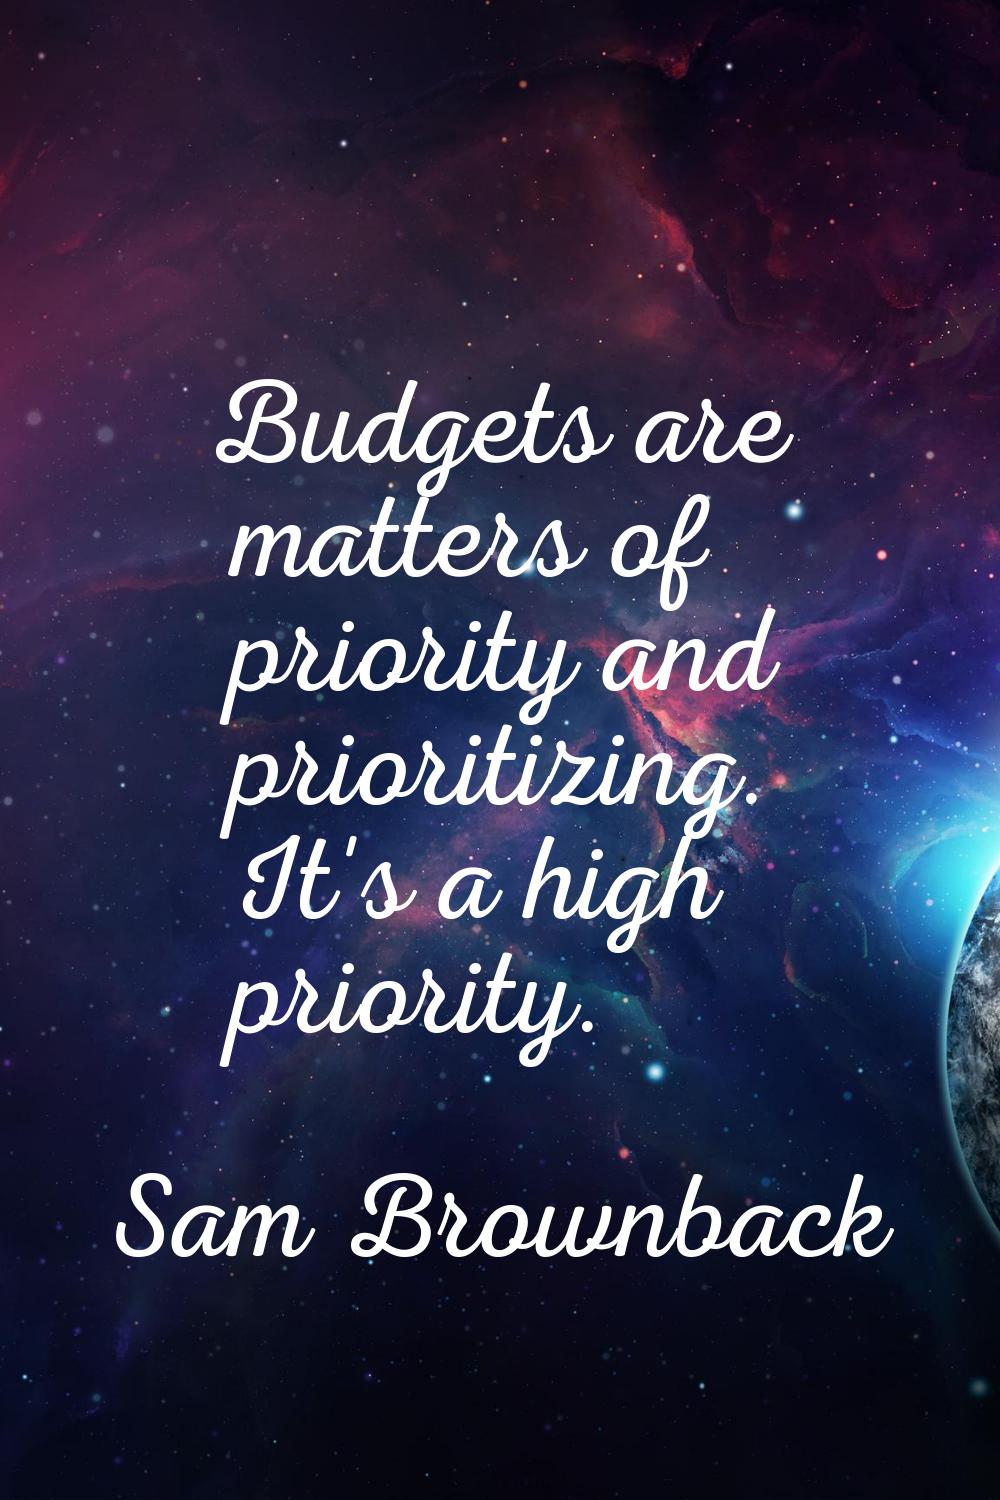 Budgets are matters of priority and prioritizing. It's a high priority.